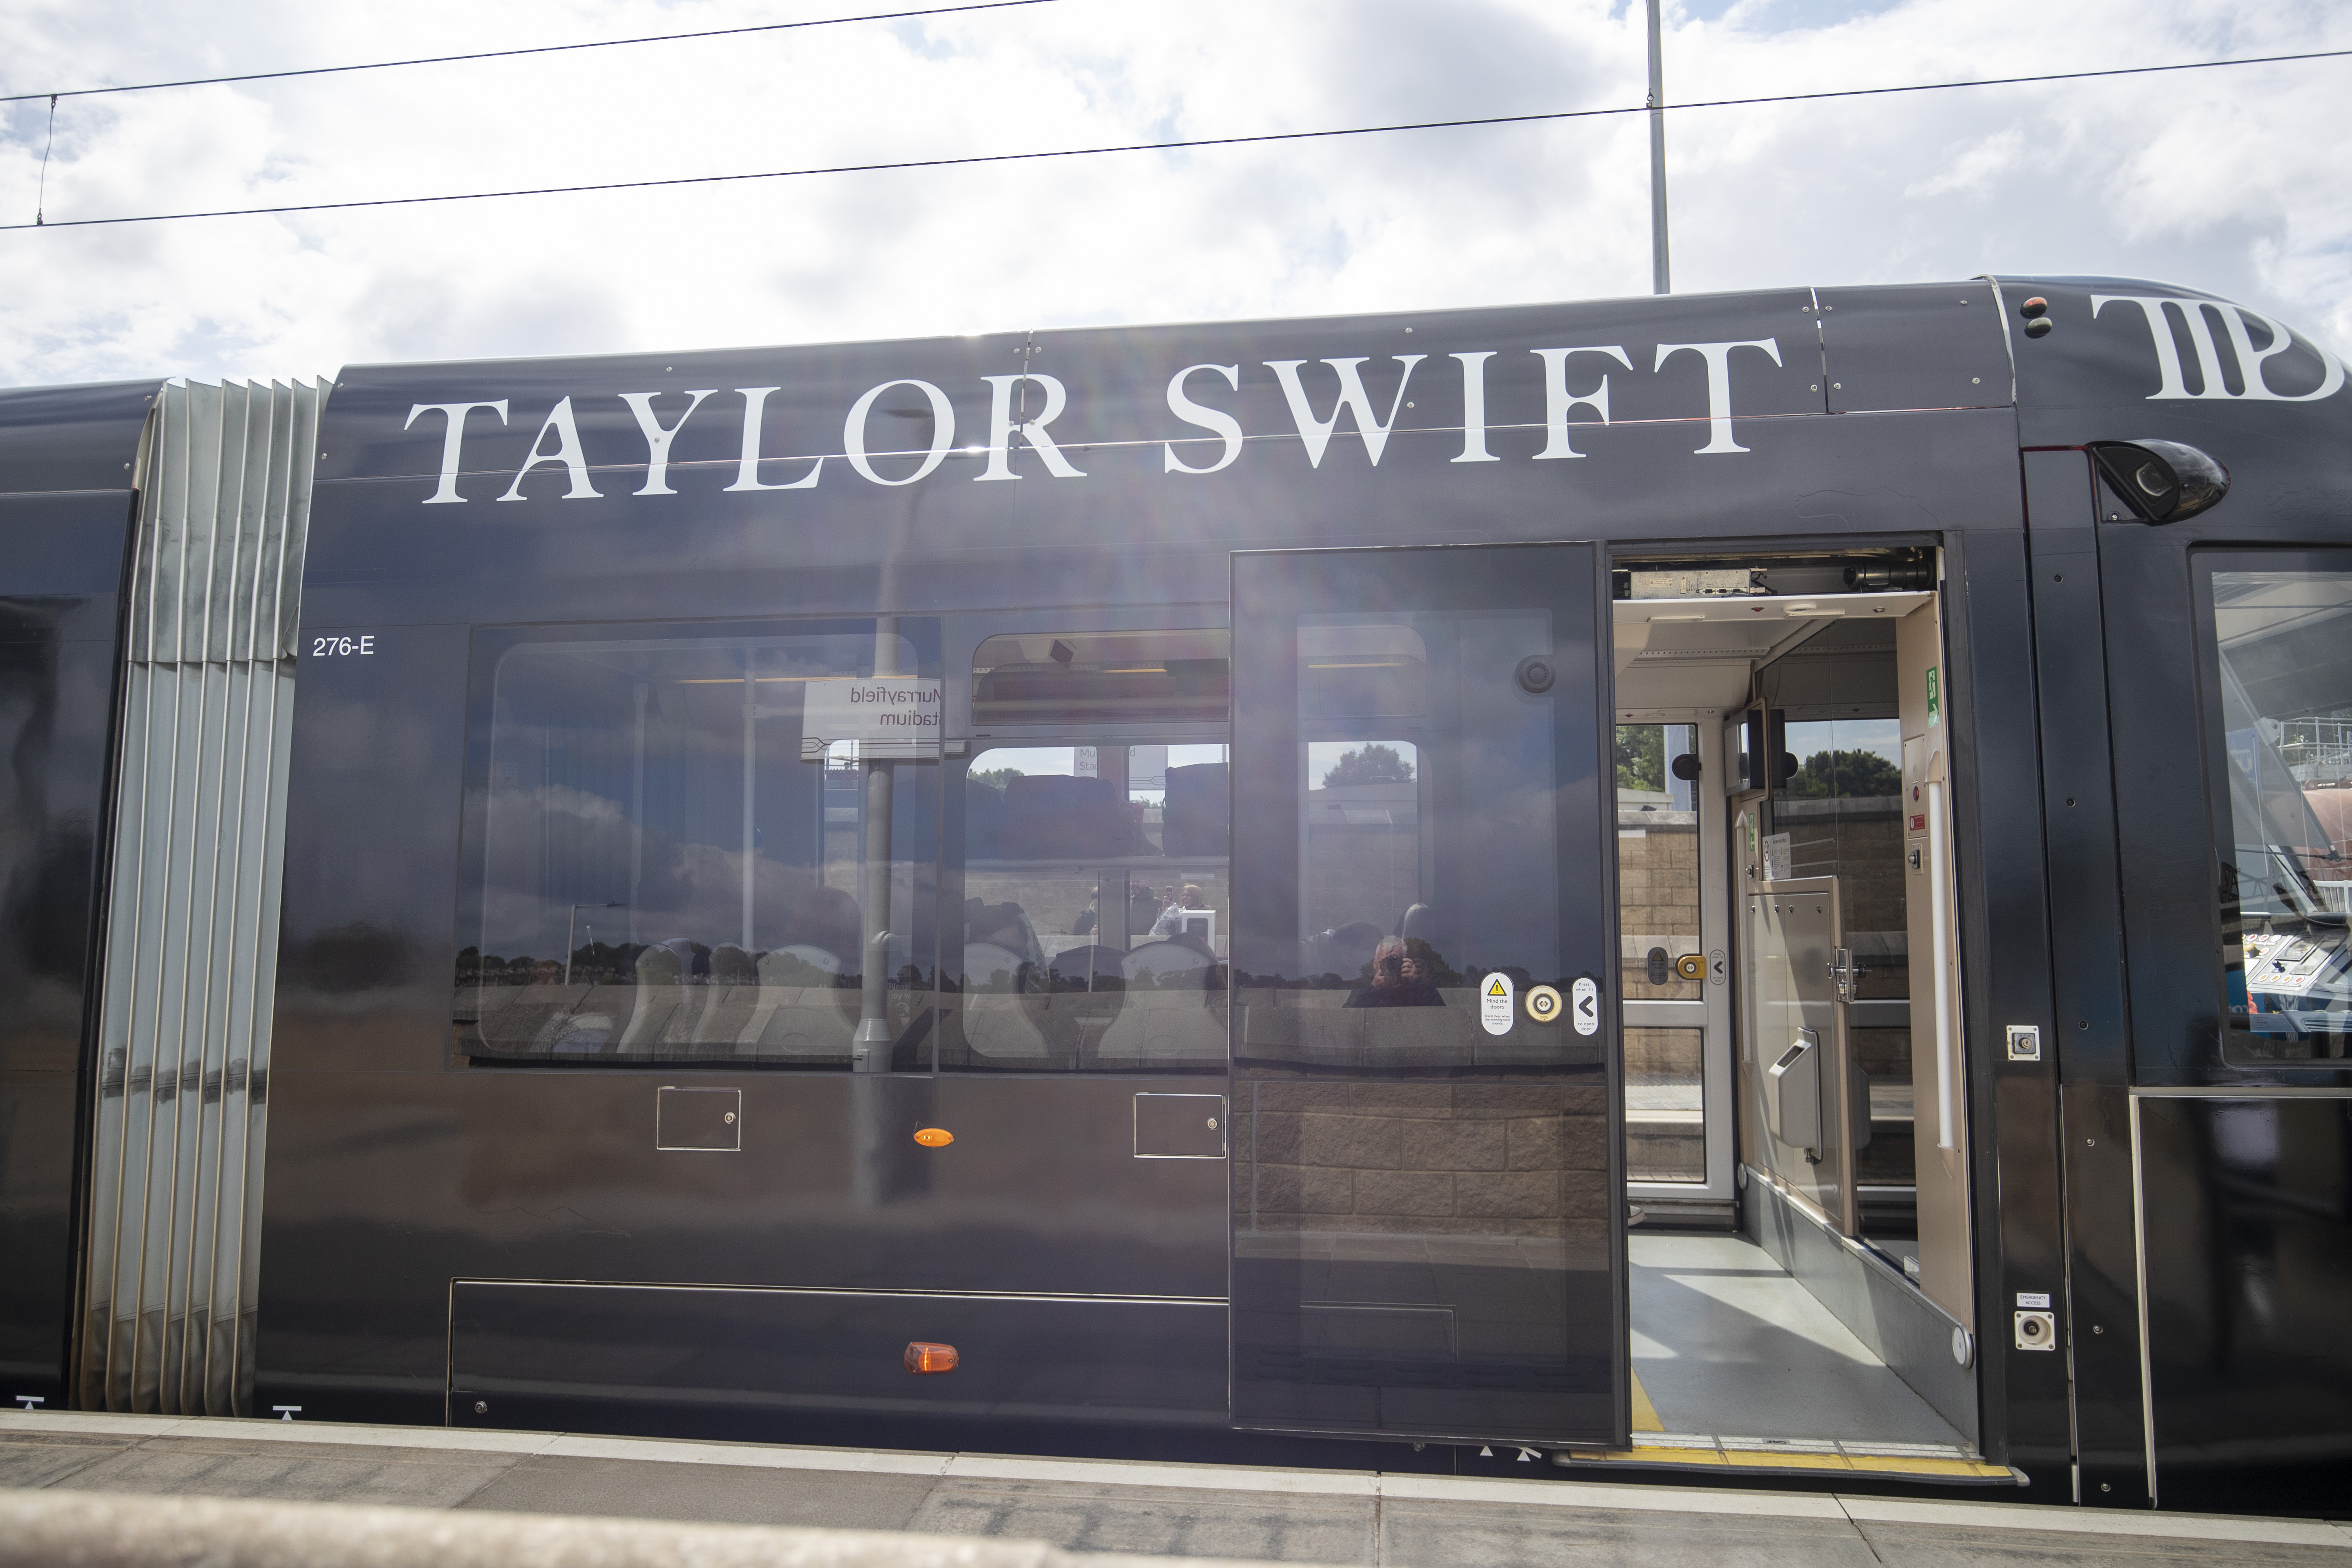 A tram has been spotted in Edinburgh with Taylor Swift's name